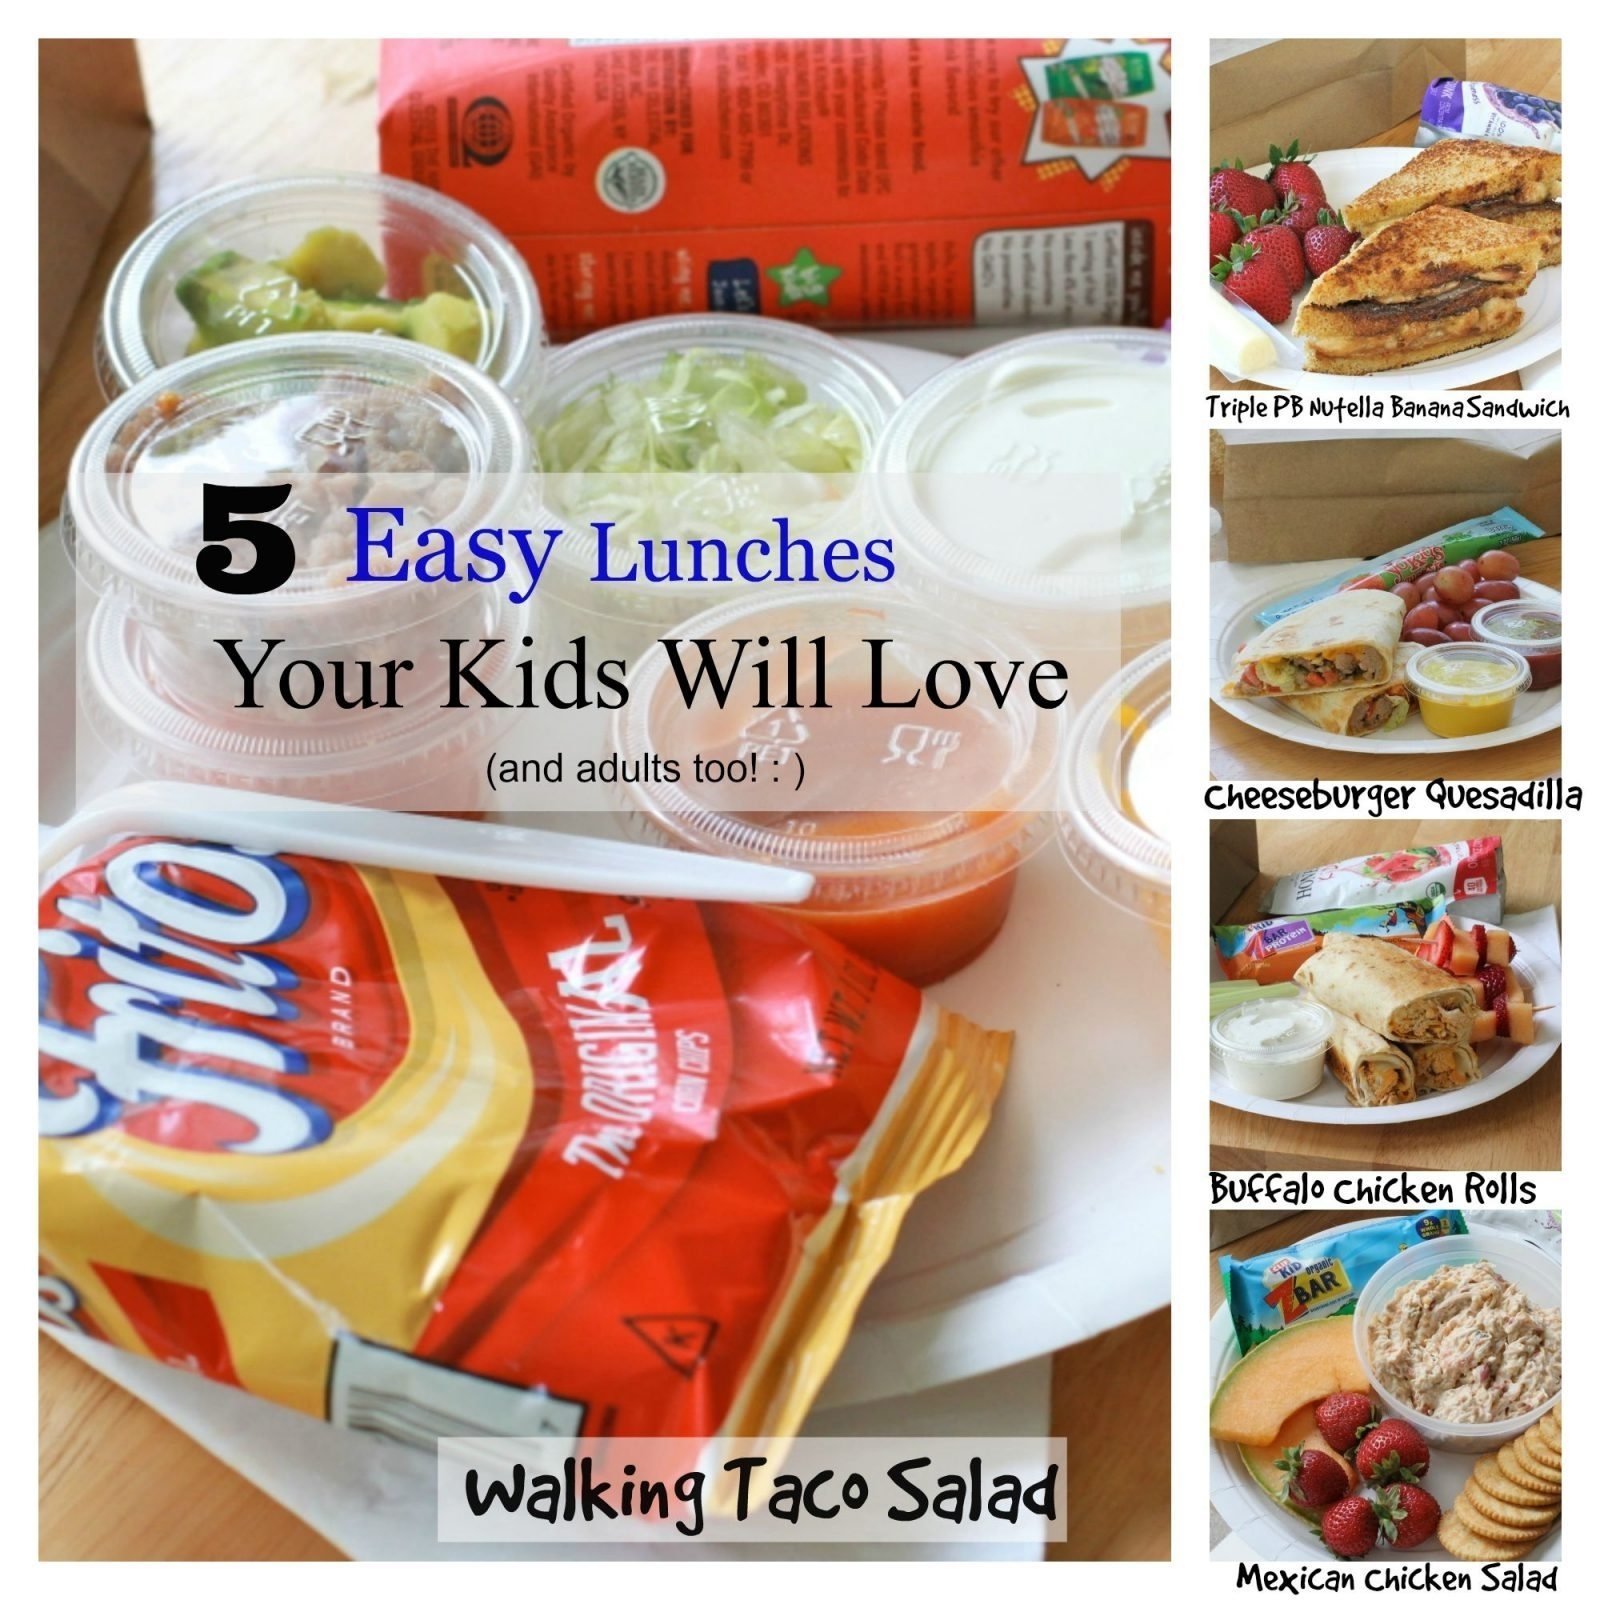 10 Fabulous Lunch Ideas For Kids At School easy school lunch idea recipes divas can cook 6 2022